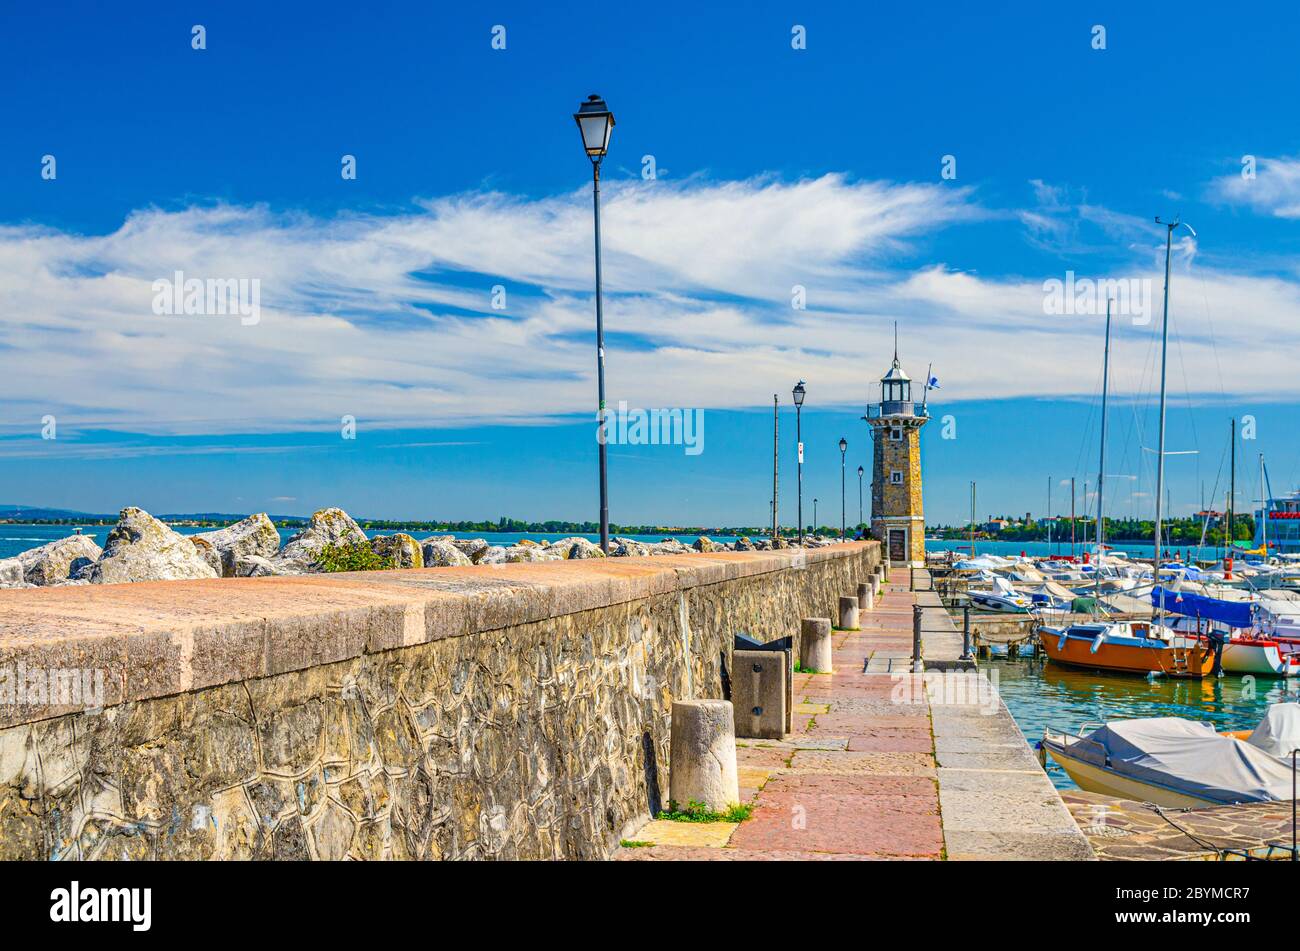 Stone pier mole with lighthouse, street lights and yachts on boat parking port marina in Desenzano del Garda town, blue sky white clouds background, Lombardy, Northern Italy Stock Photo